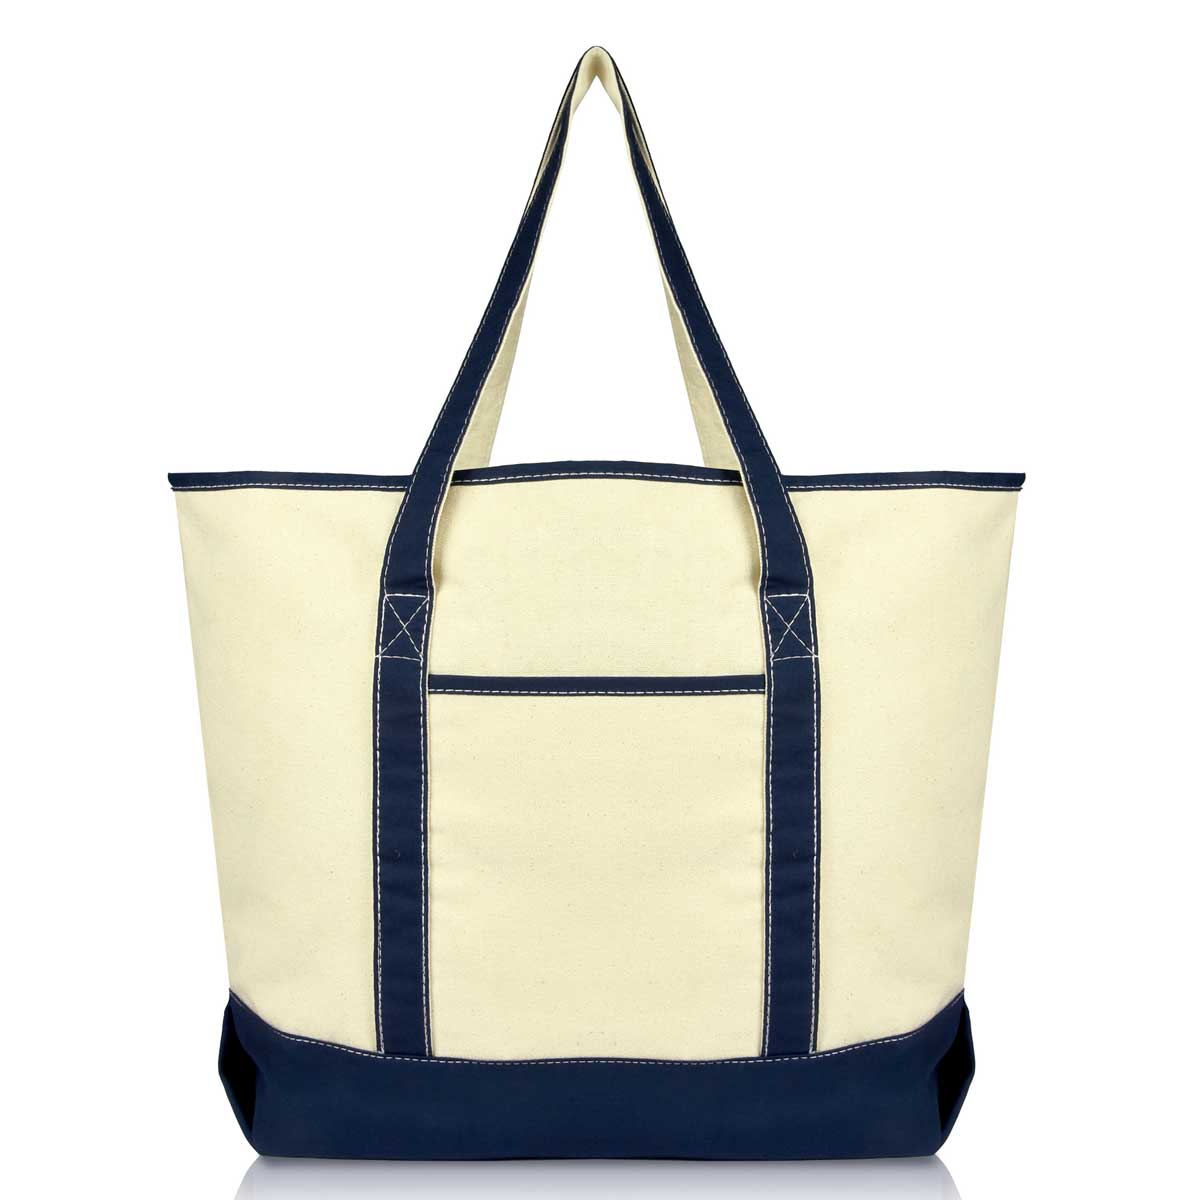 Dalix Rainbow Tote Bag with Zippered Top